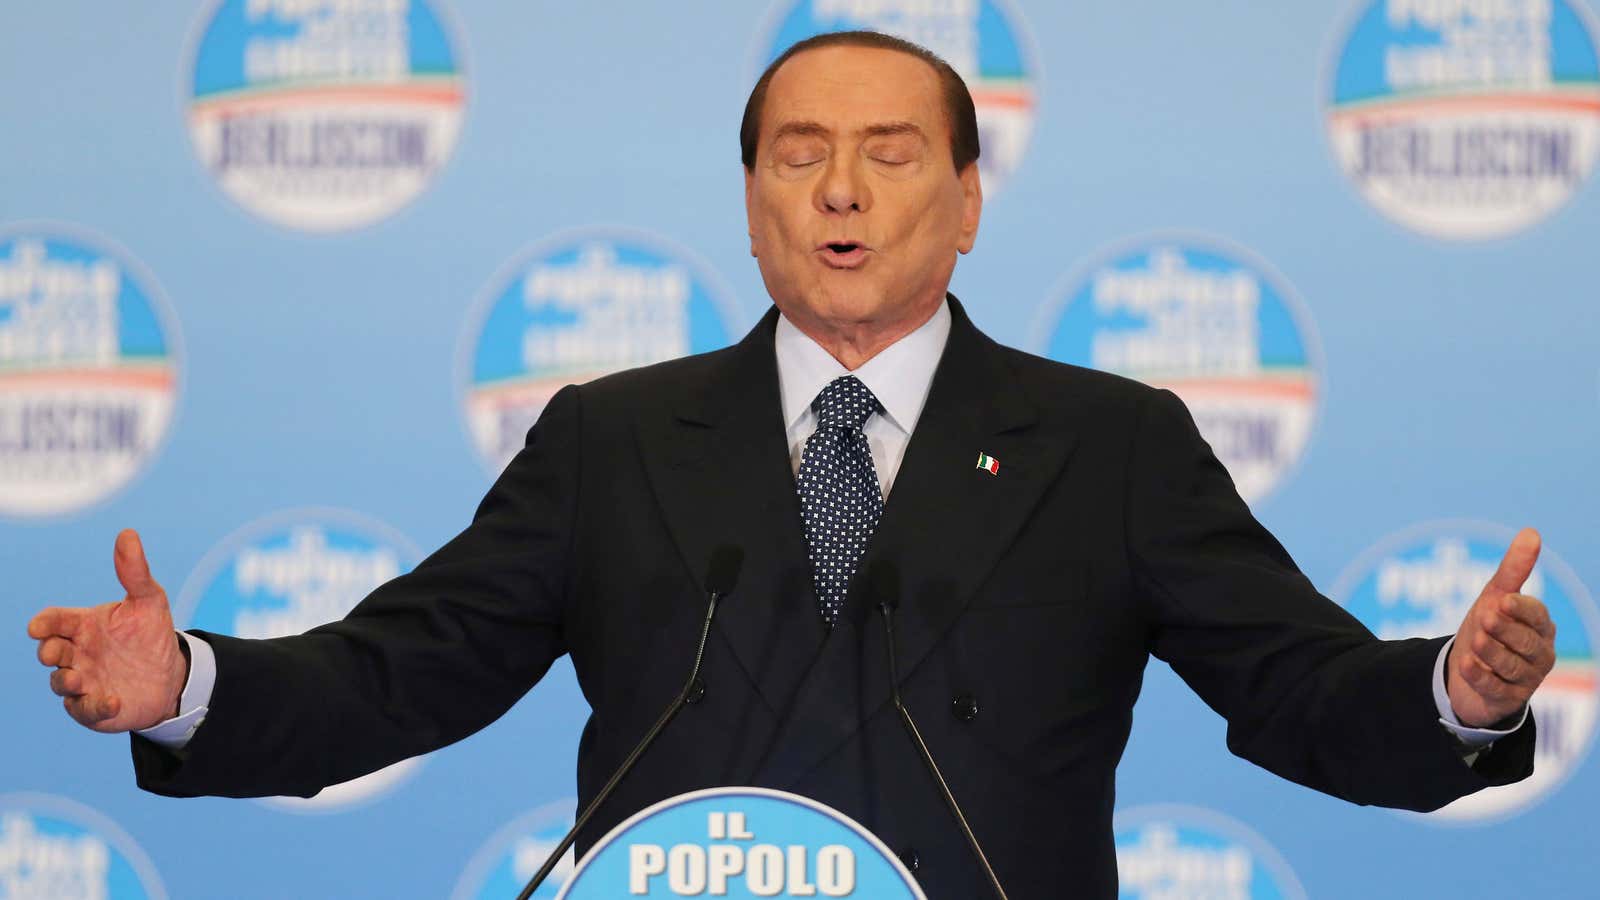 Pucker up! Berlusconi looks to plant a kiss on the Italian electorate.